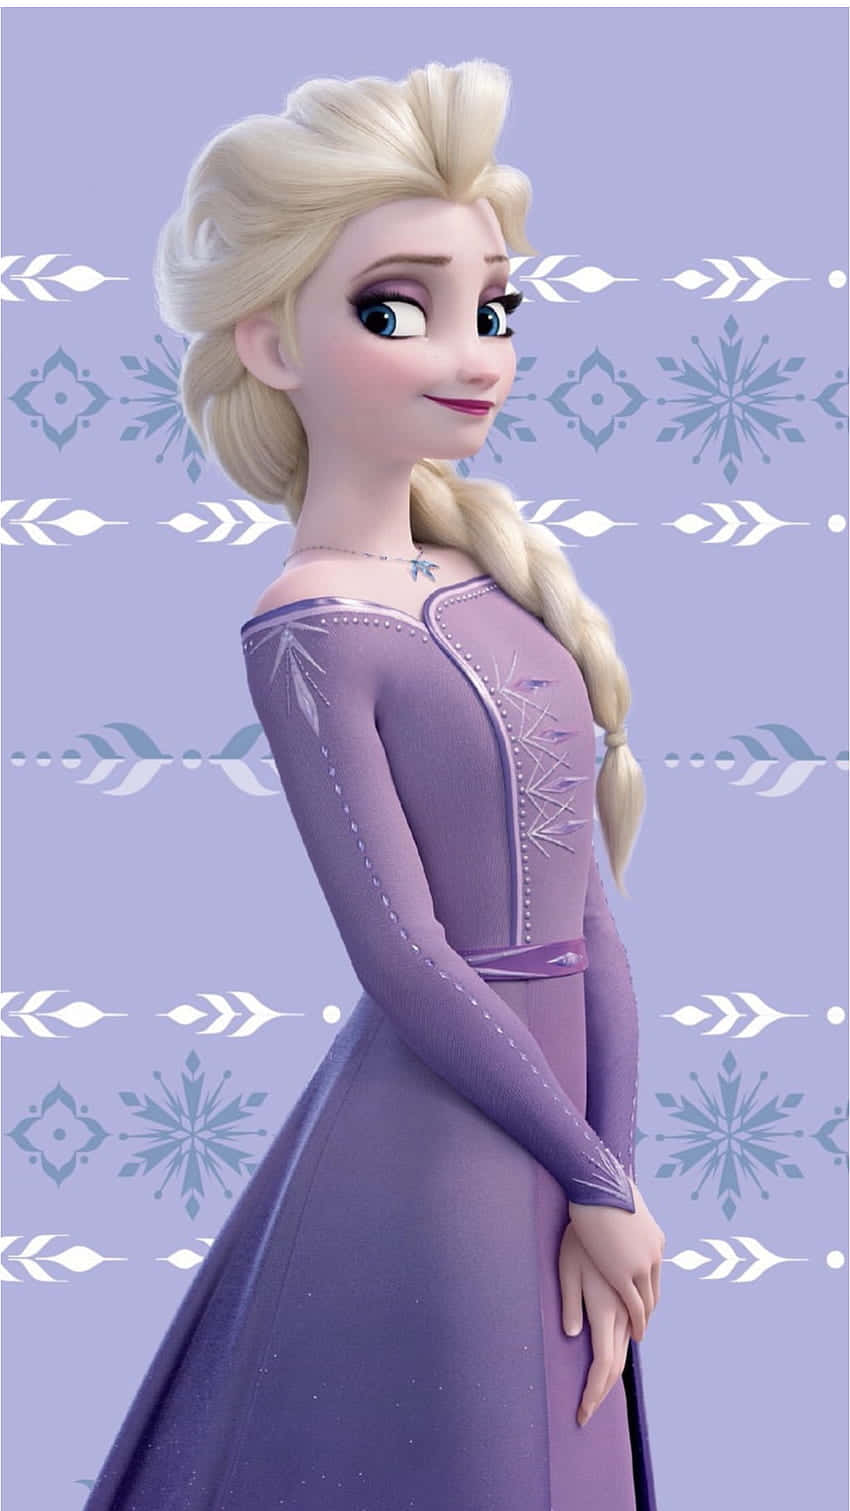 Get the most advanced technology to your use with the Elsa Phone. Wallpaper